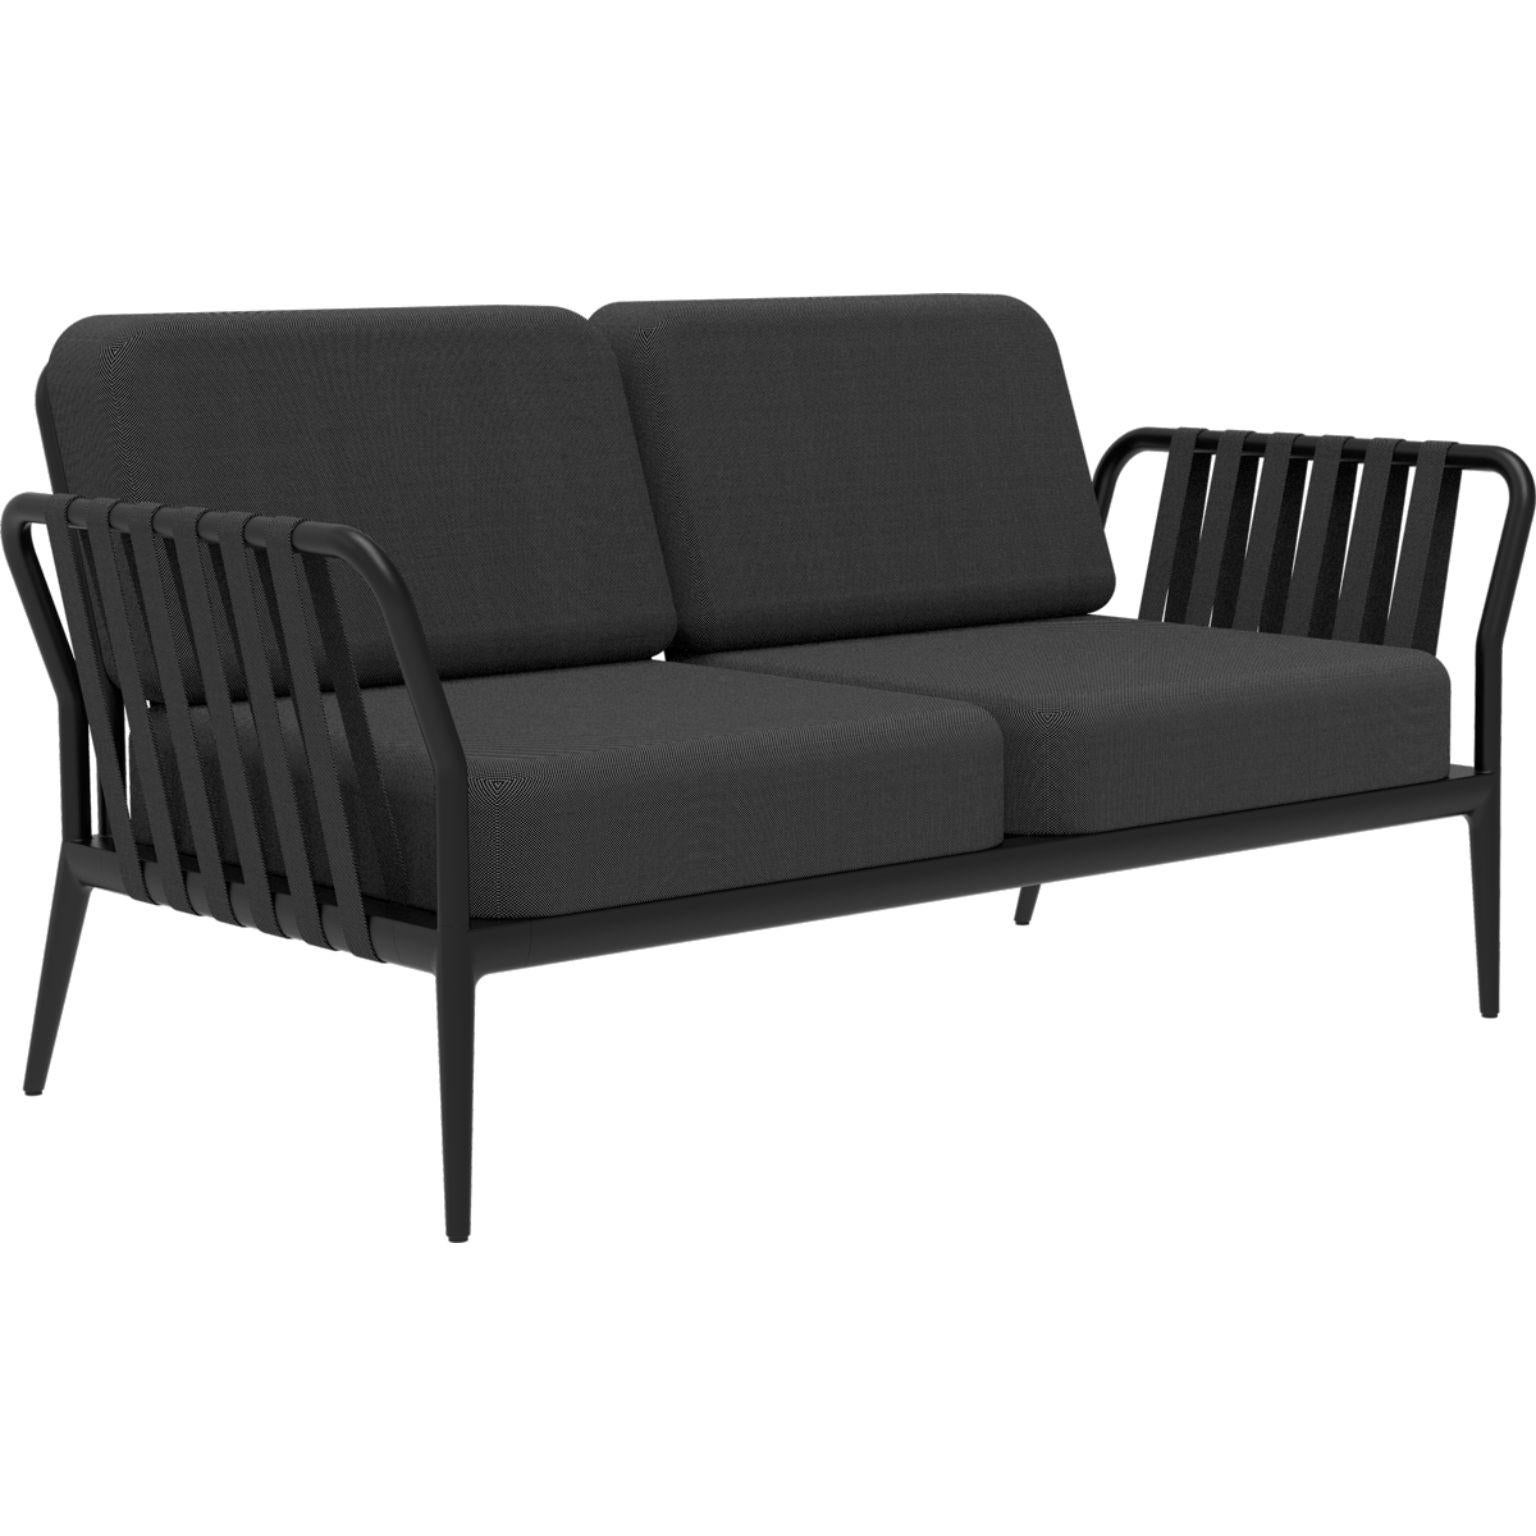 Ribbons black sofa by MOWEE
Dimensions: D83 x W160 x H81 cm
Material: Aluminum, Upholstery
Weight: 32 kg
Also available in different colors and finishes. 

An unmistakable collection for its beauty and robustness. A tribute to the Valencian